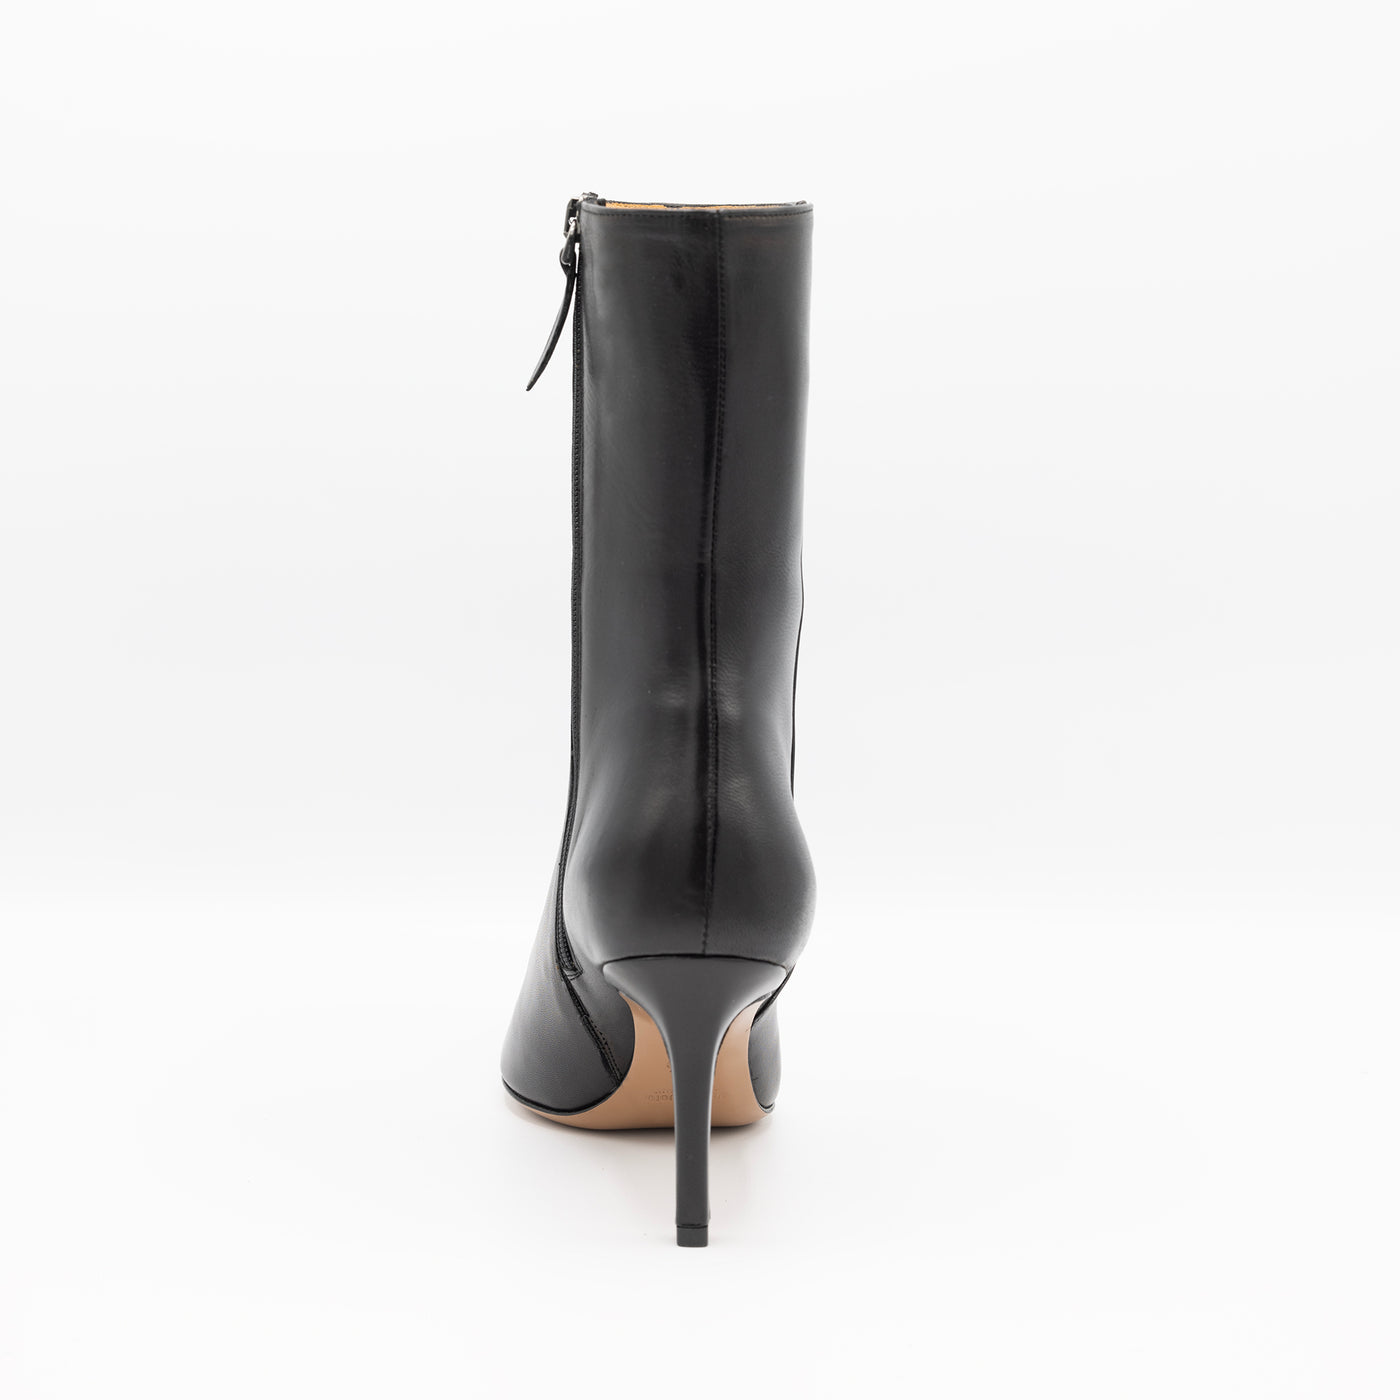 Pointy booties. High shaft black leather boots. 